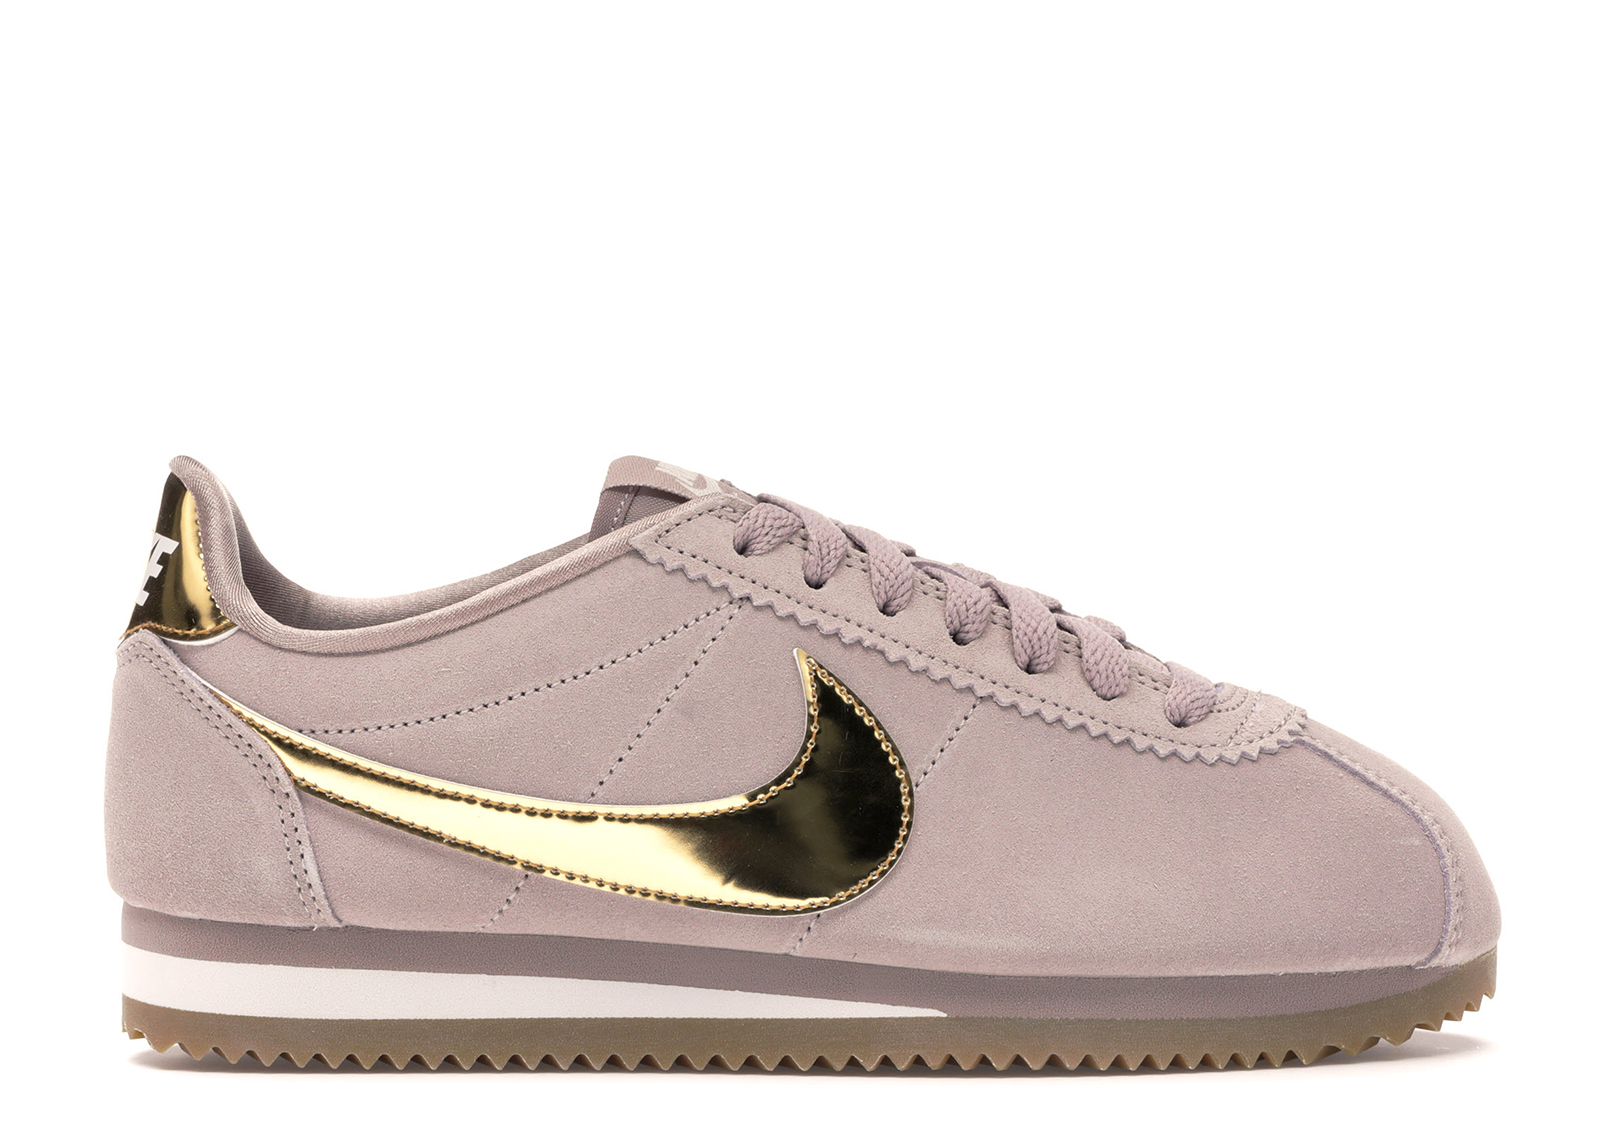 nike cortez taupe gold